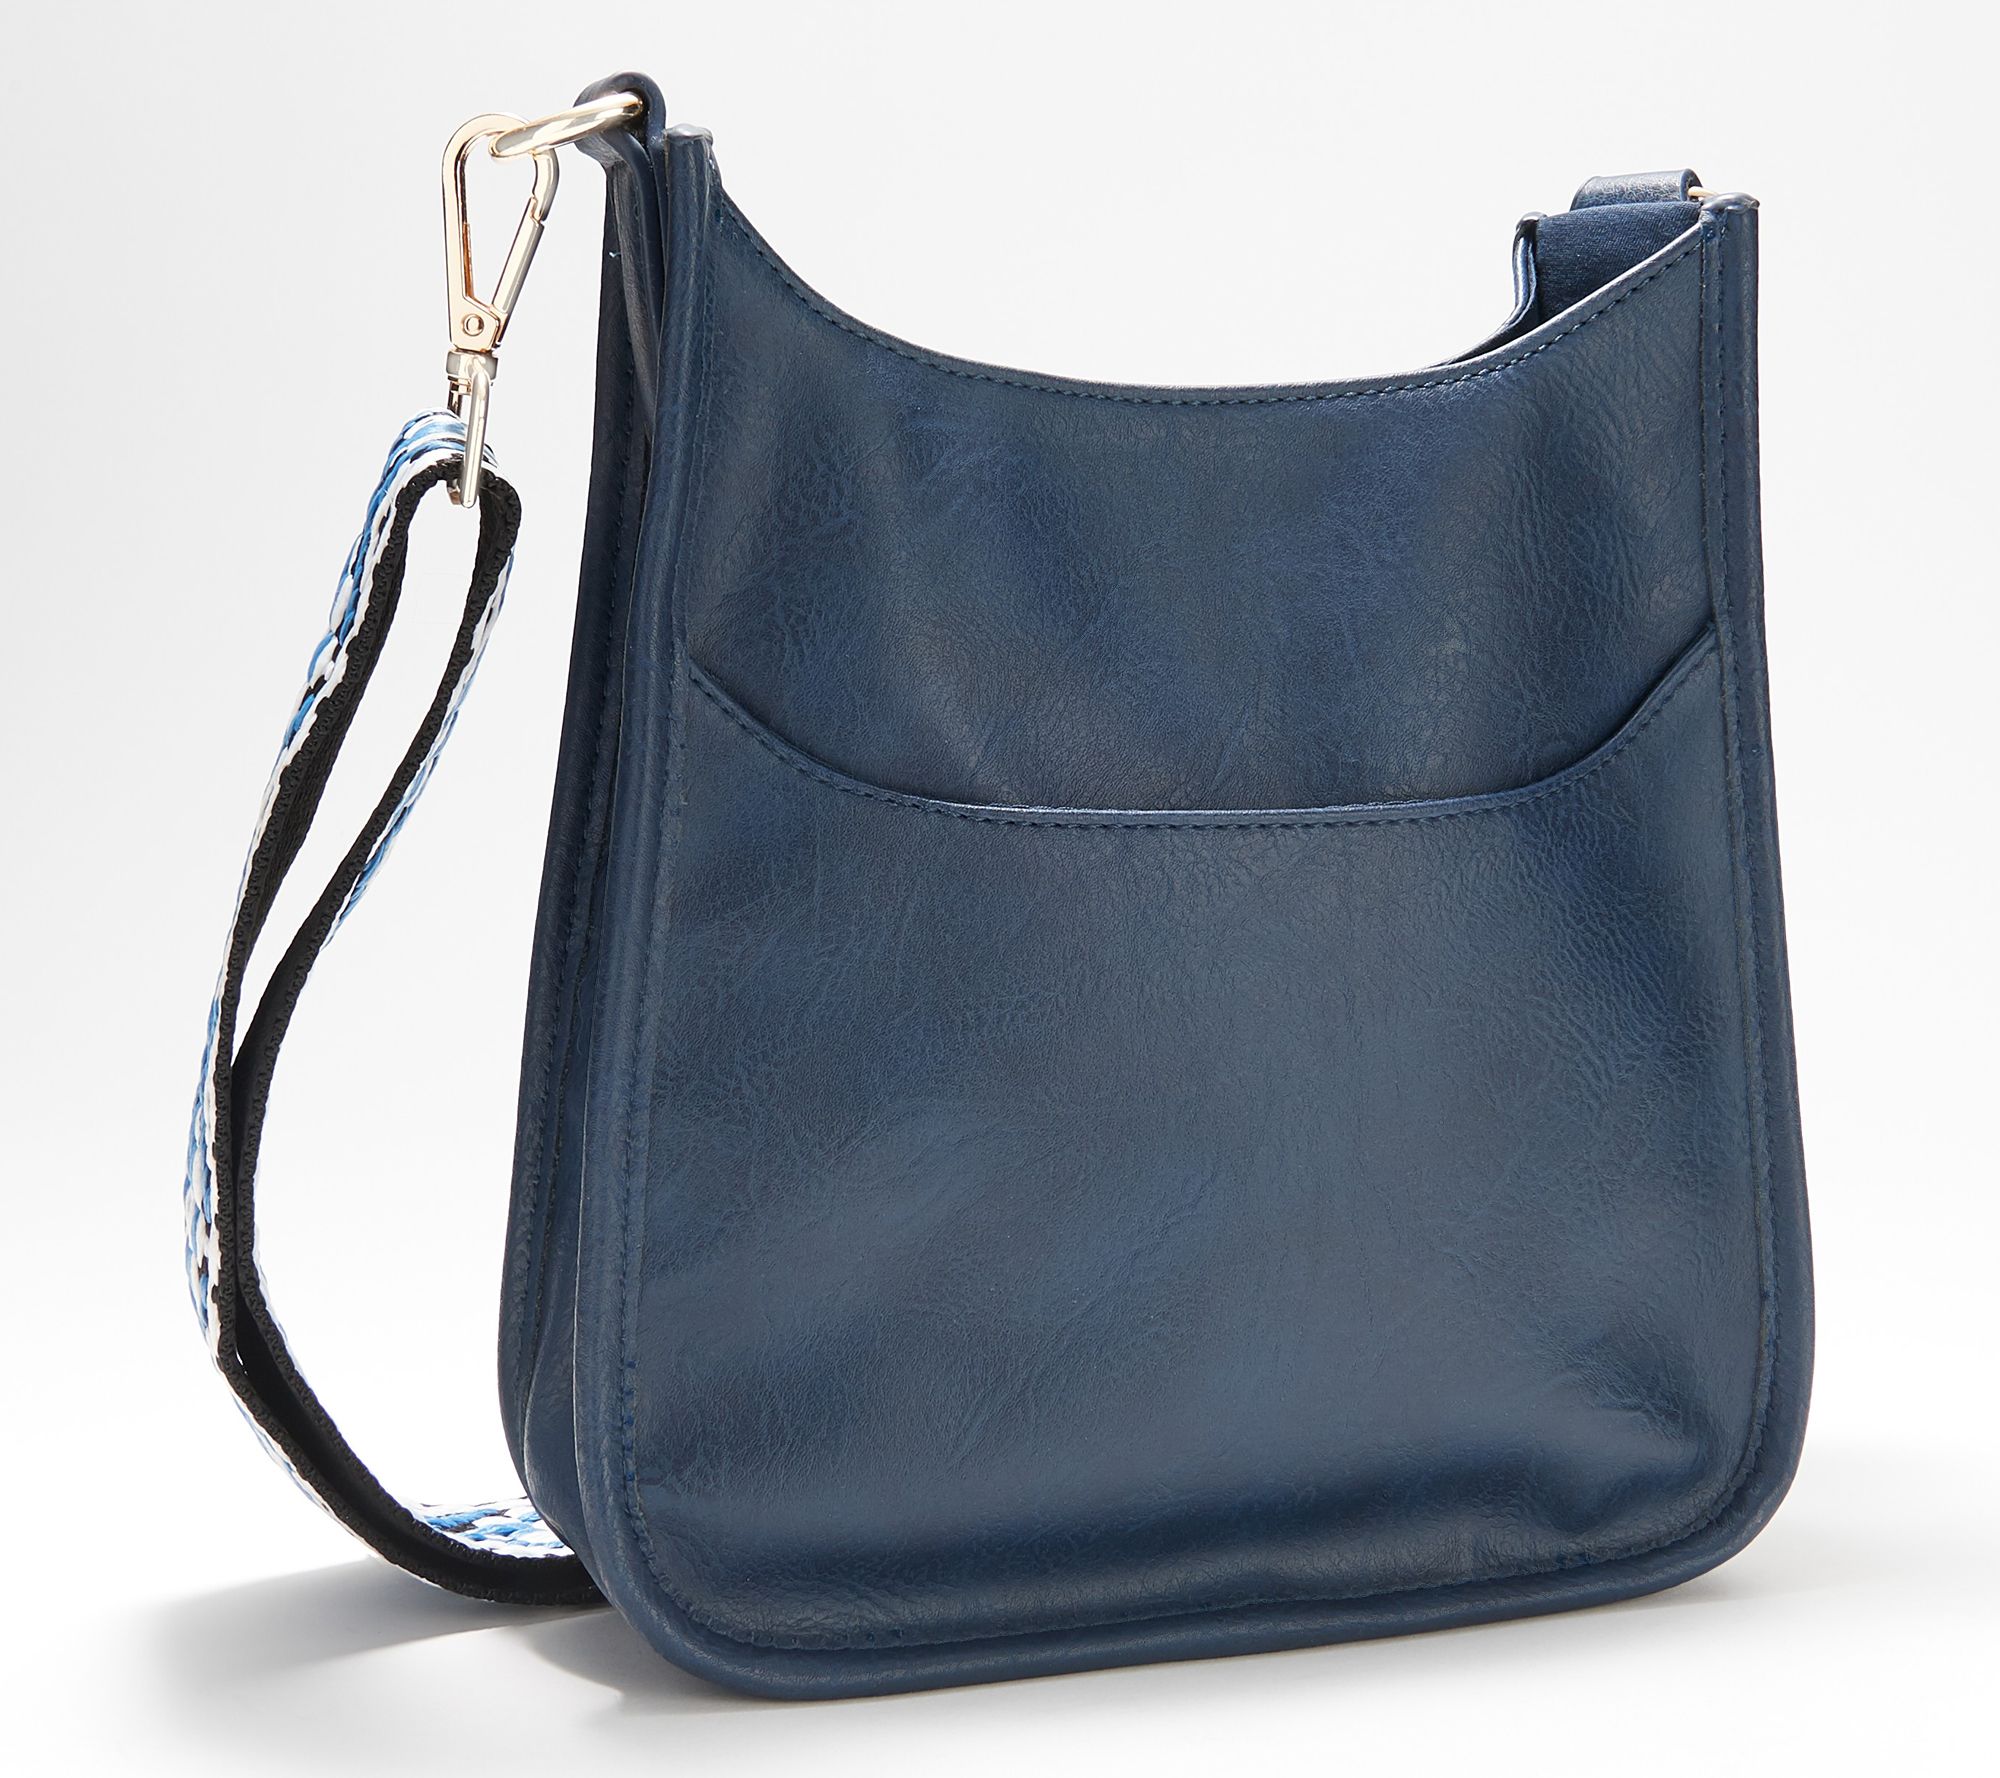 AHDORNED Medium Faux Leather Crossbody with Extra Strap - QVC.com